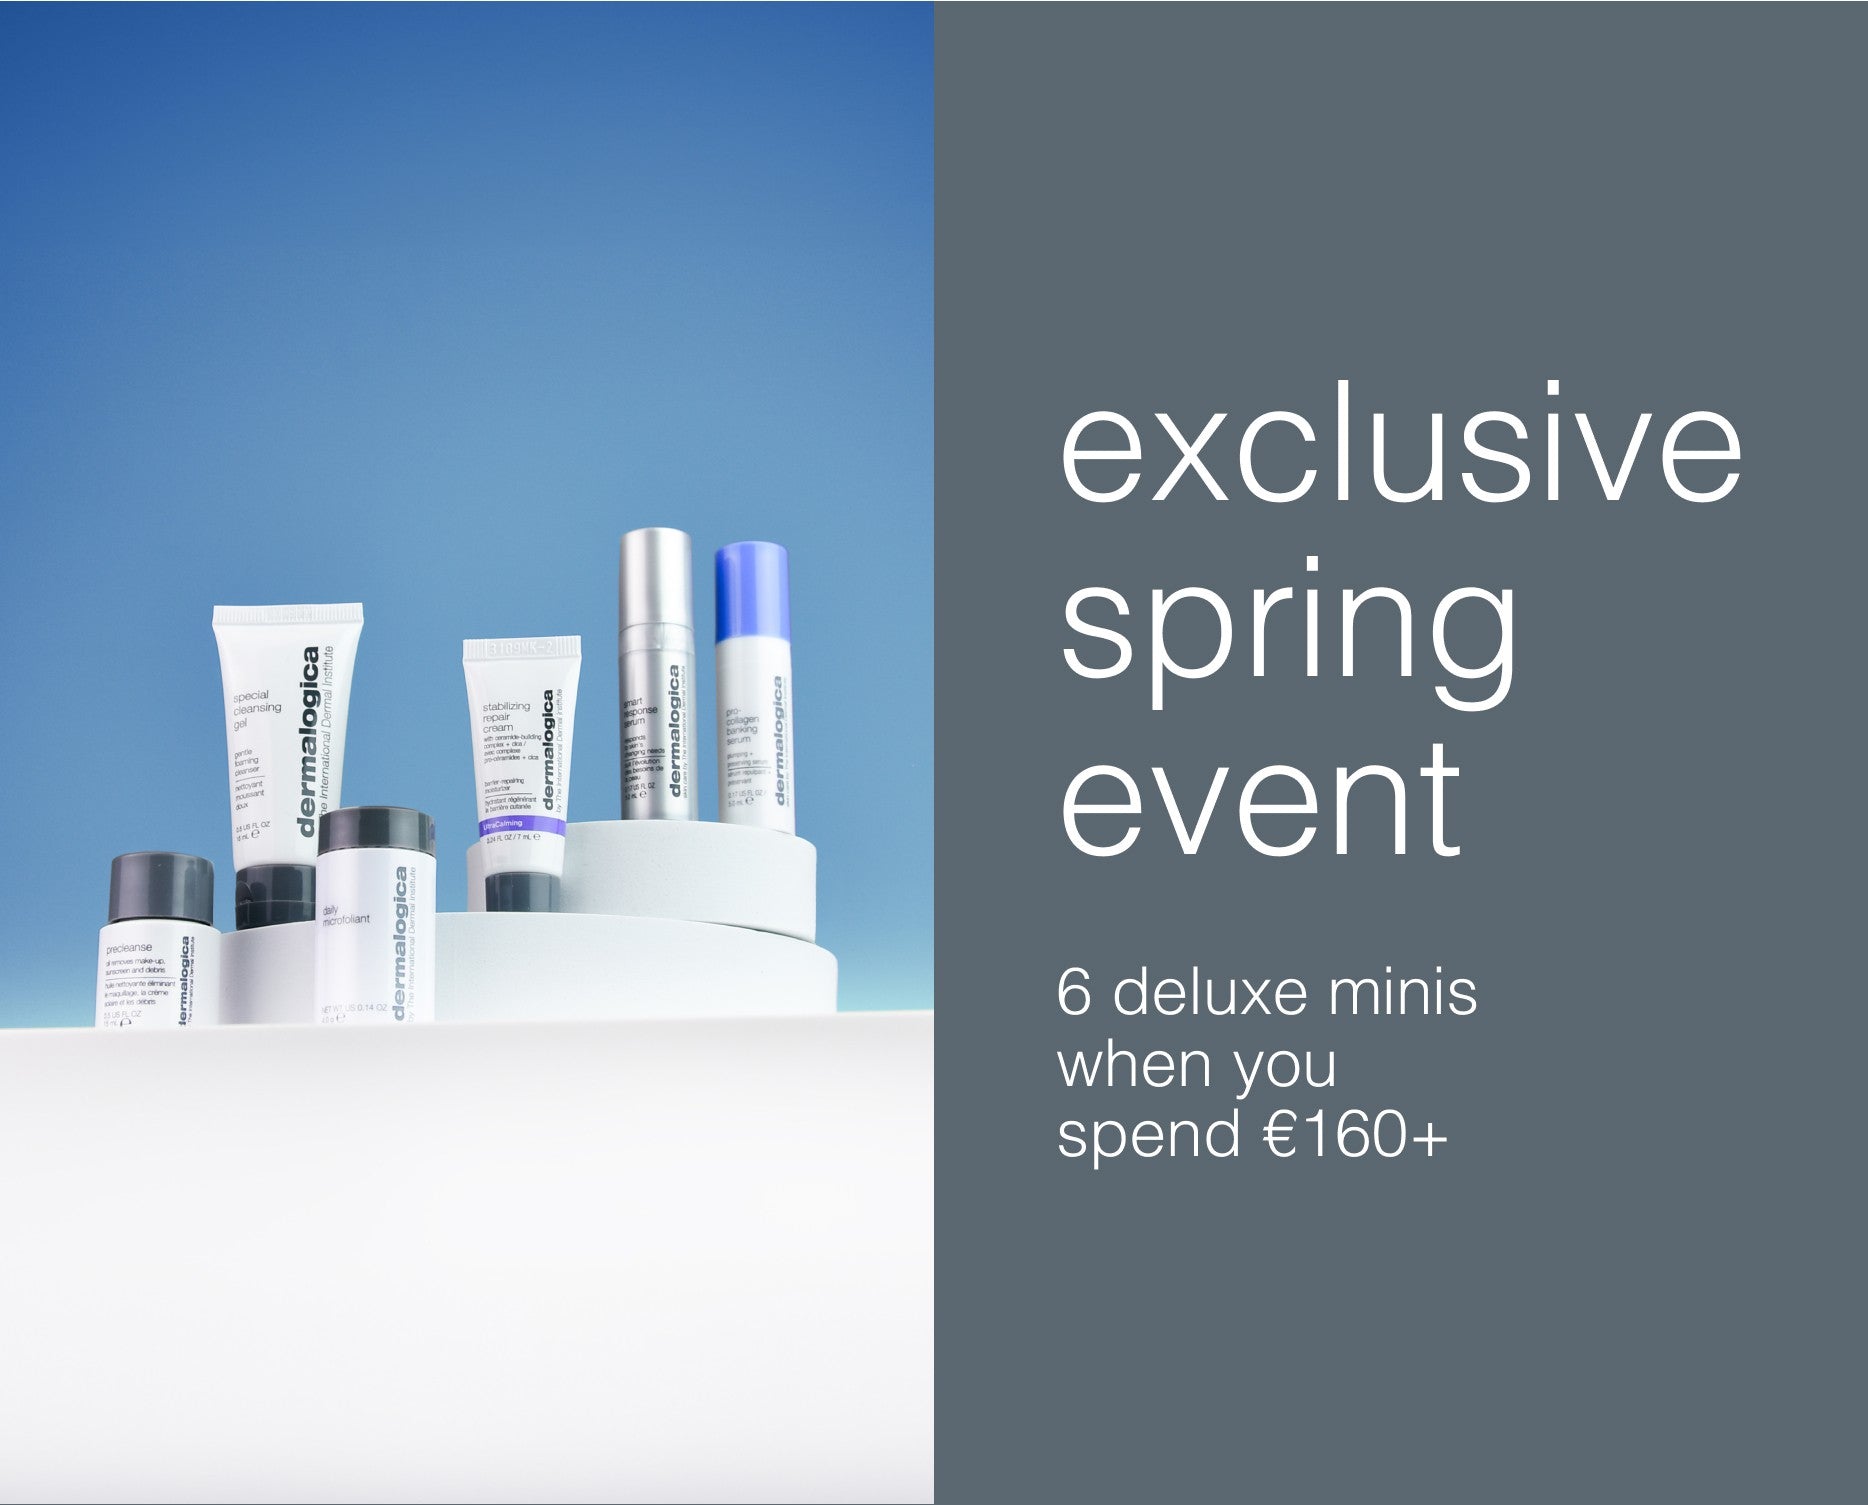 Exclusive Spring Event, 6 deluxe minis when you spend €160+